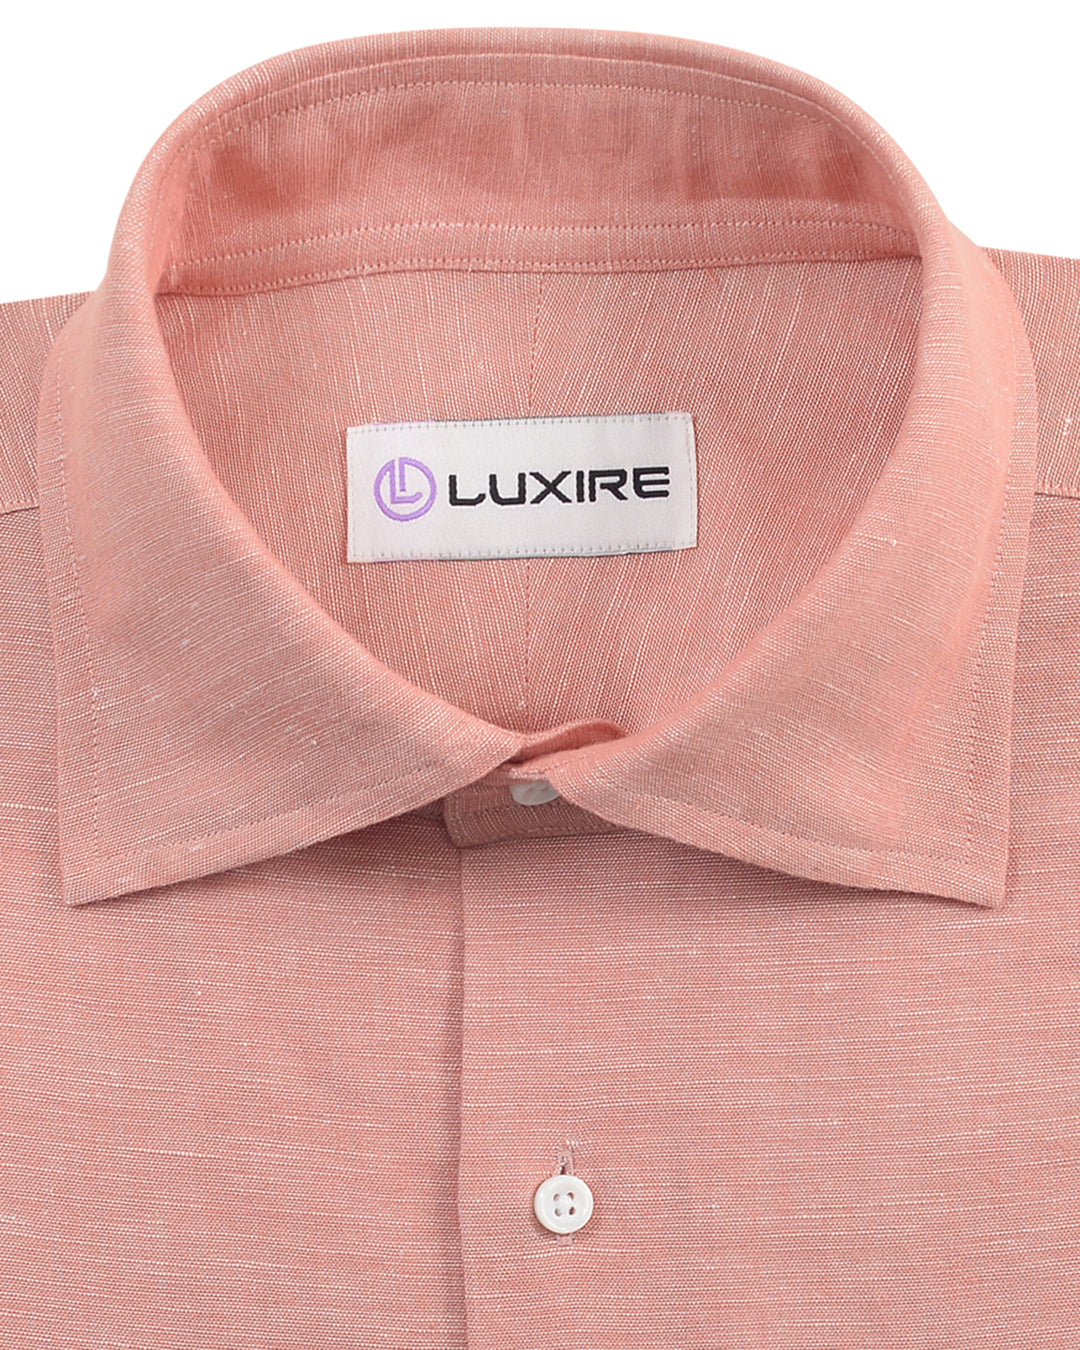 Collar of the custom linen shirt for men in plain red chambray by Luxire Clothing